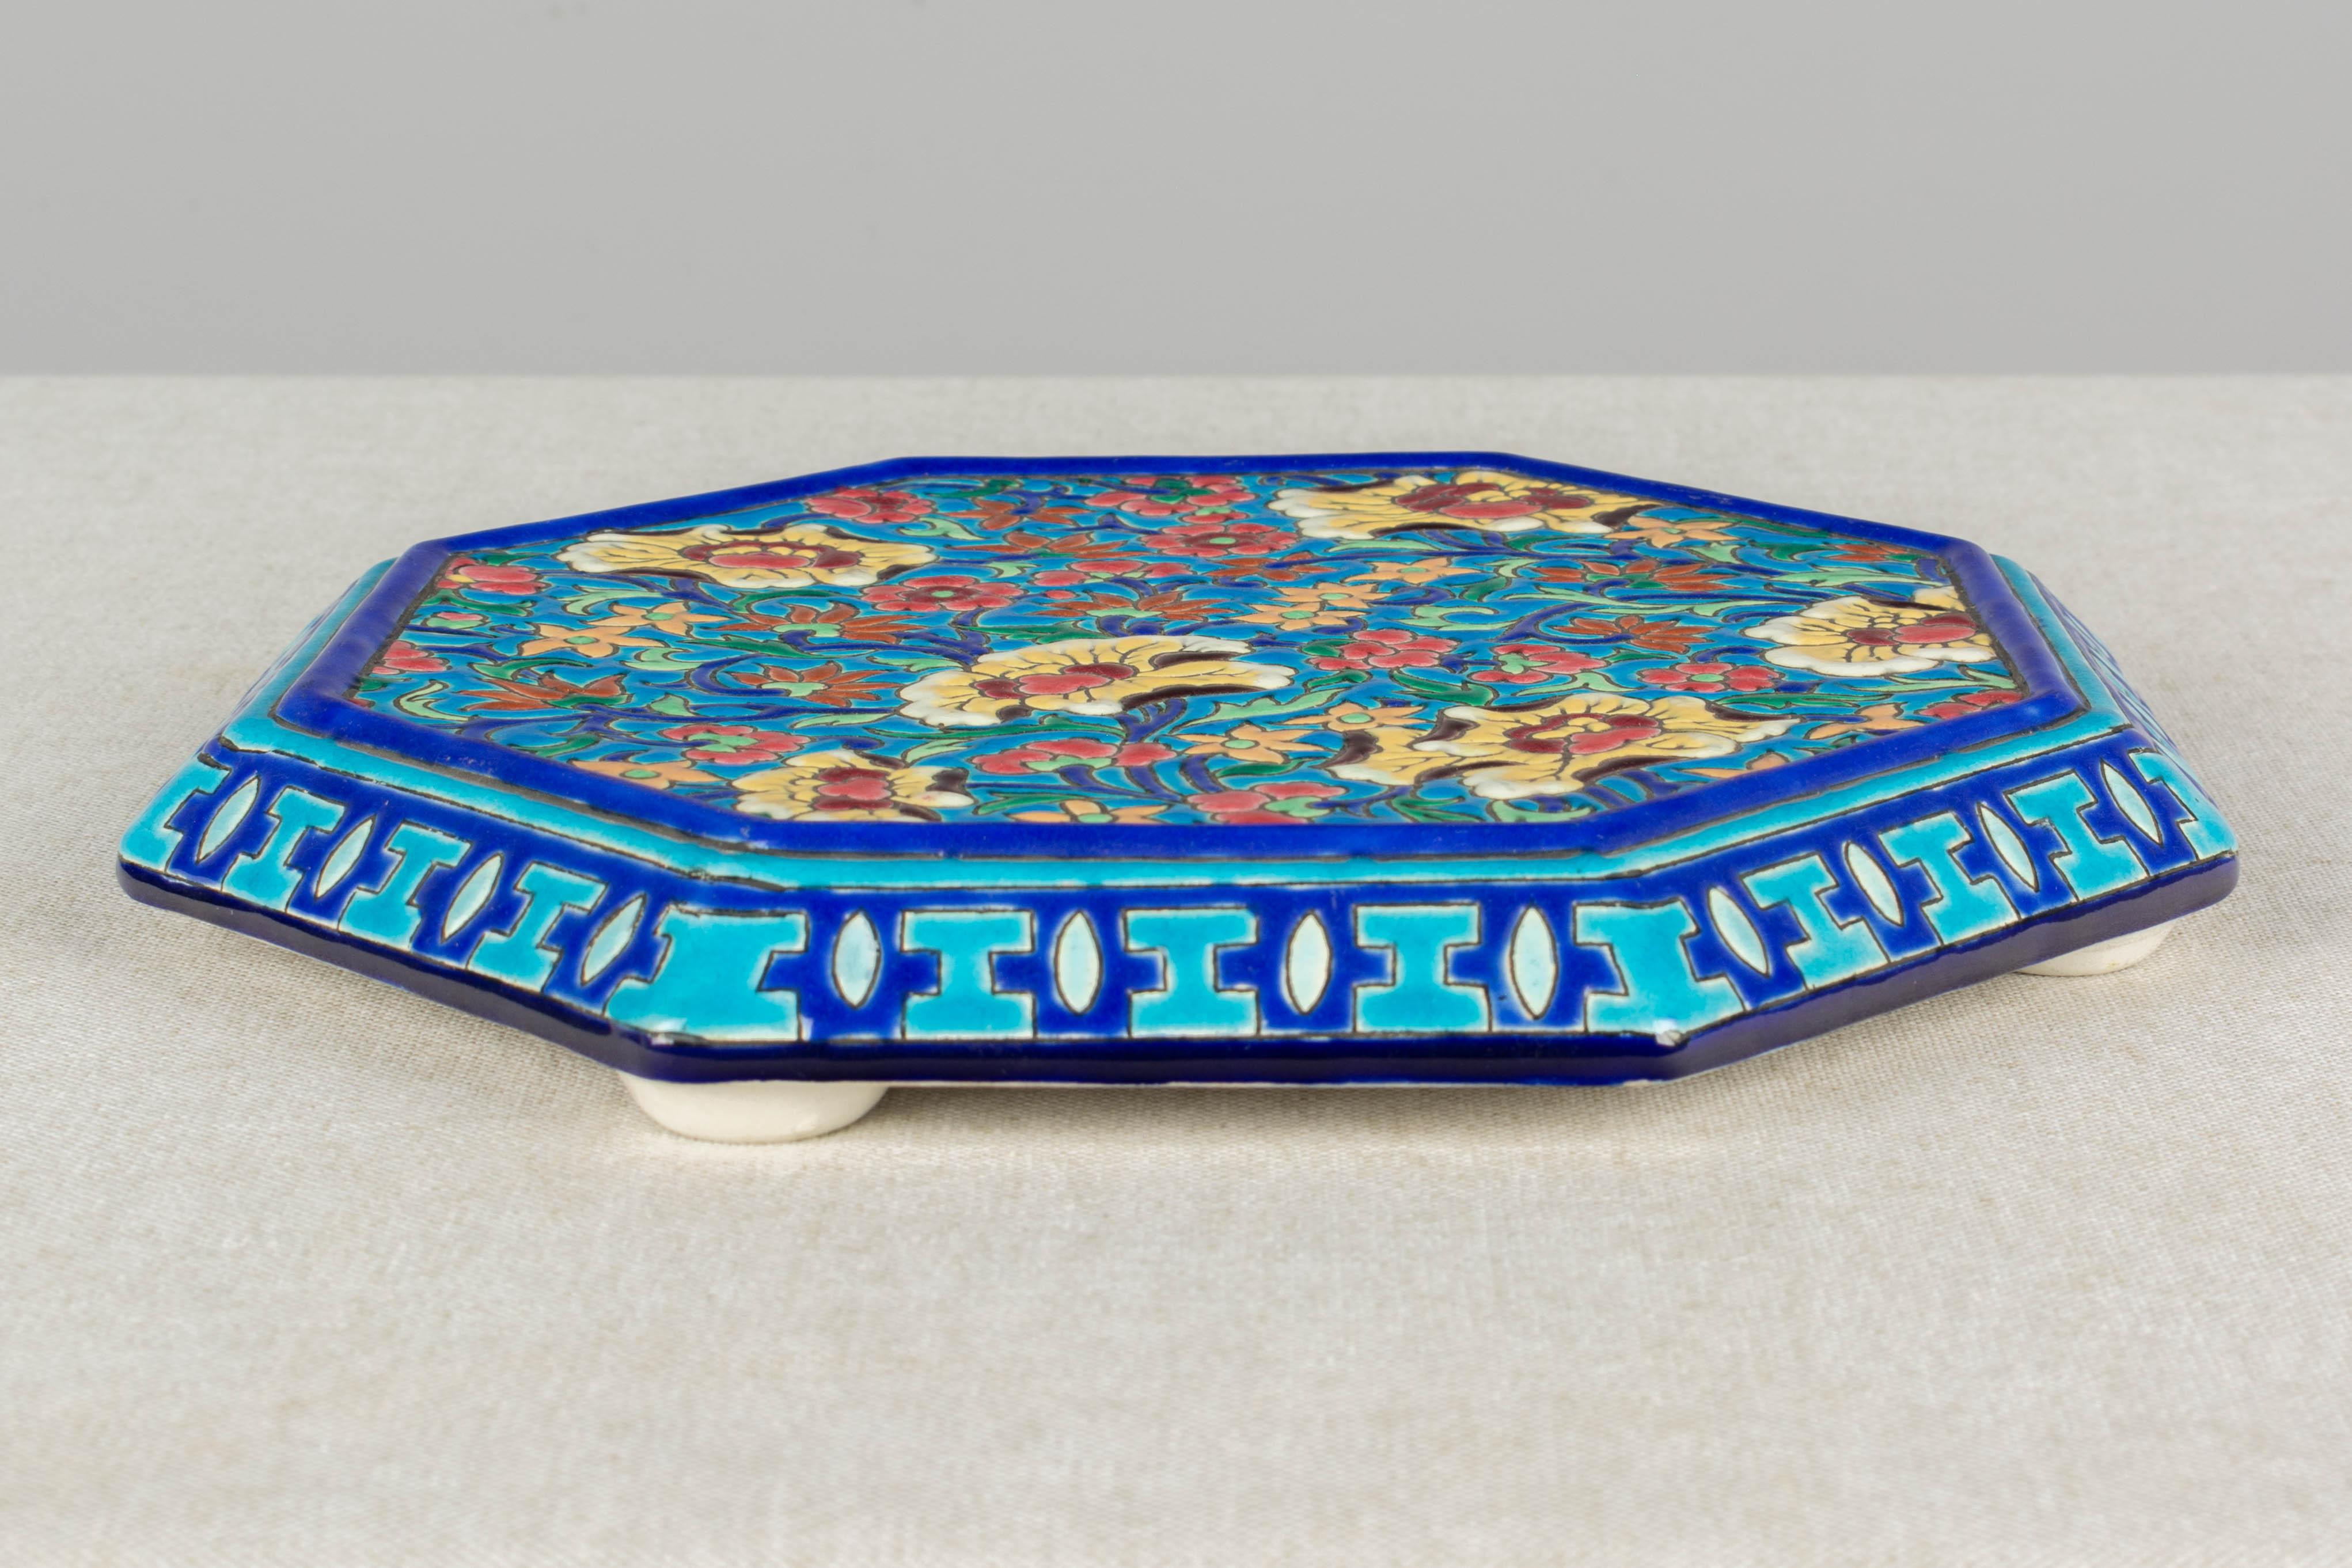 A French Art Deco Longwy octagonal shaped hand painted ceramic trivet decorated in the style of chinoiserie cloisonné enamel. Bright turquoise blue ground with a colorful overall floral design in yellow, green, orange and pink. Impressed makers mark